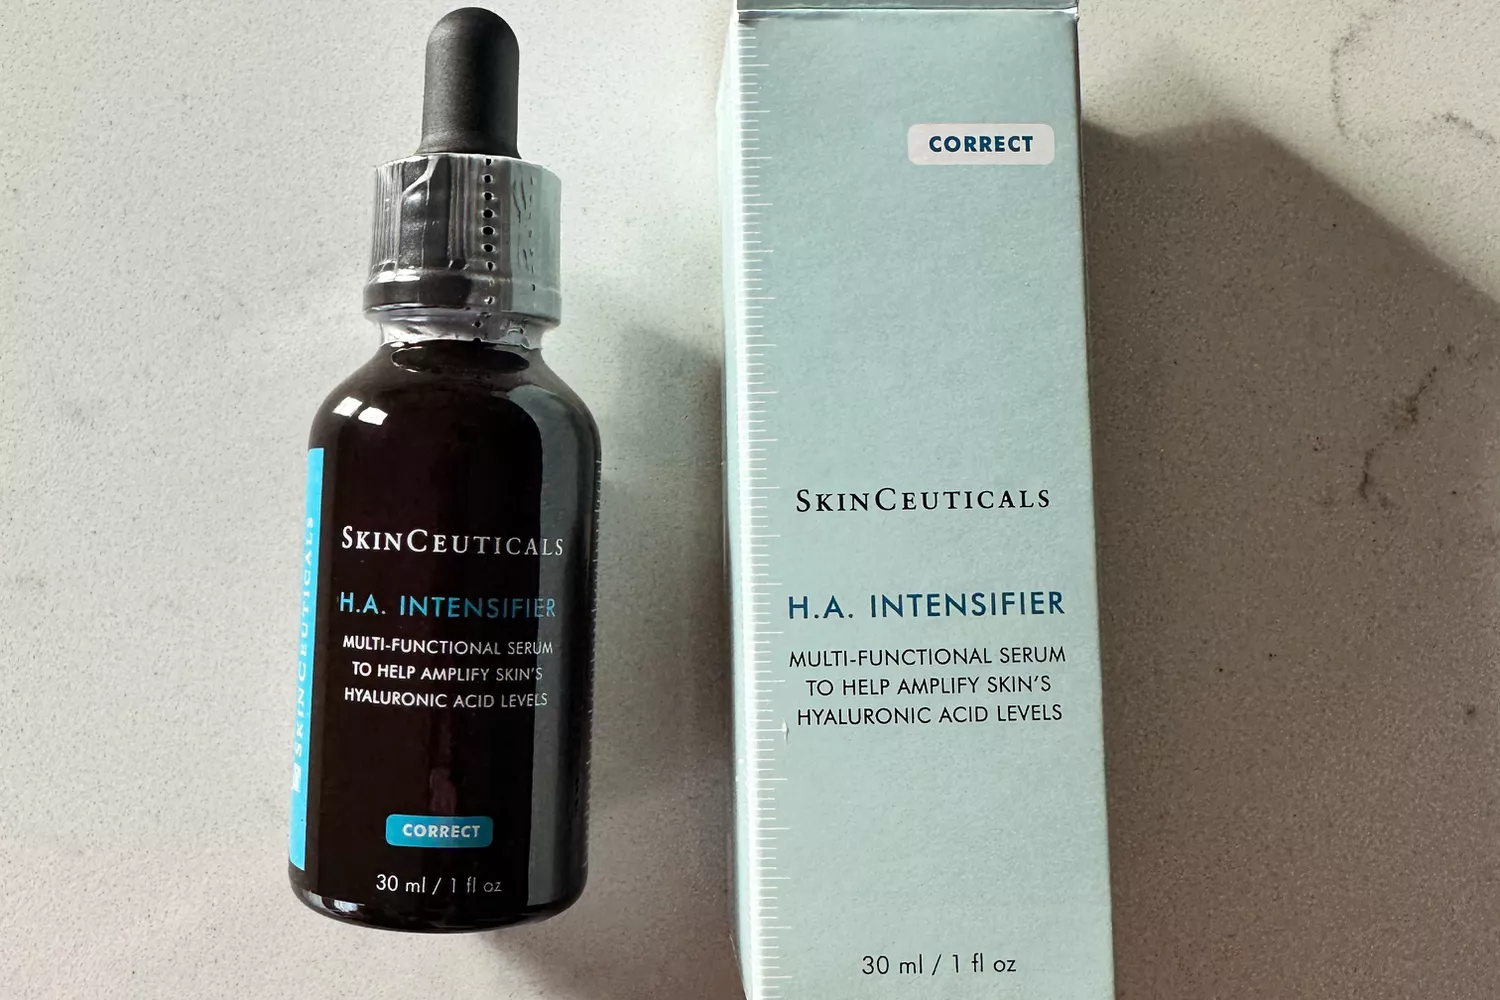 A bottle of SkinCeuticals Hyaluronic Acid Intensifier (H.A.) next to its box